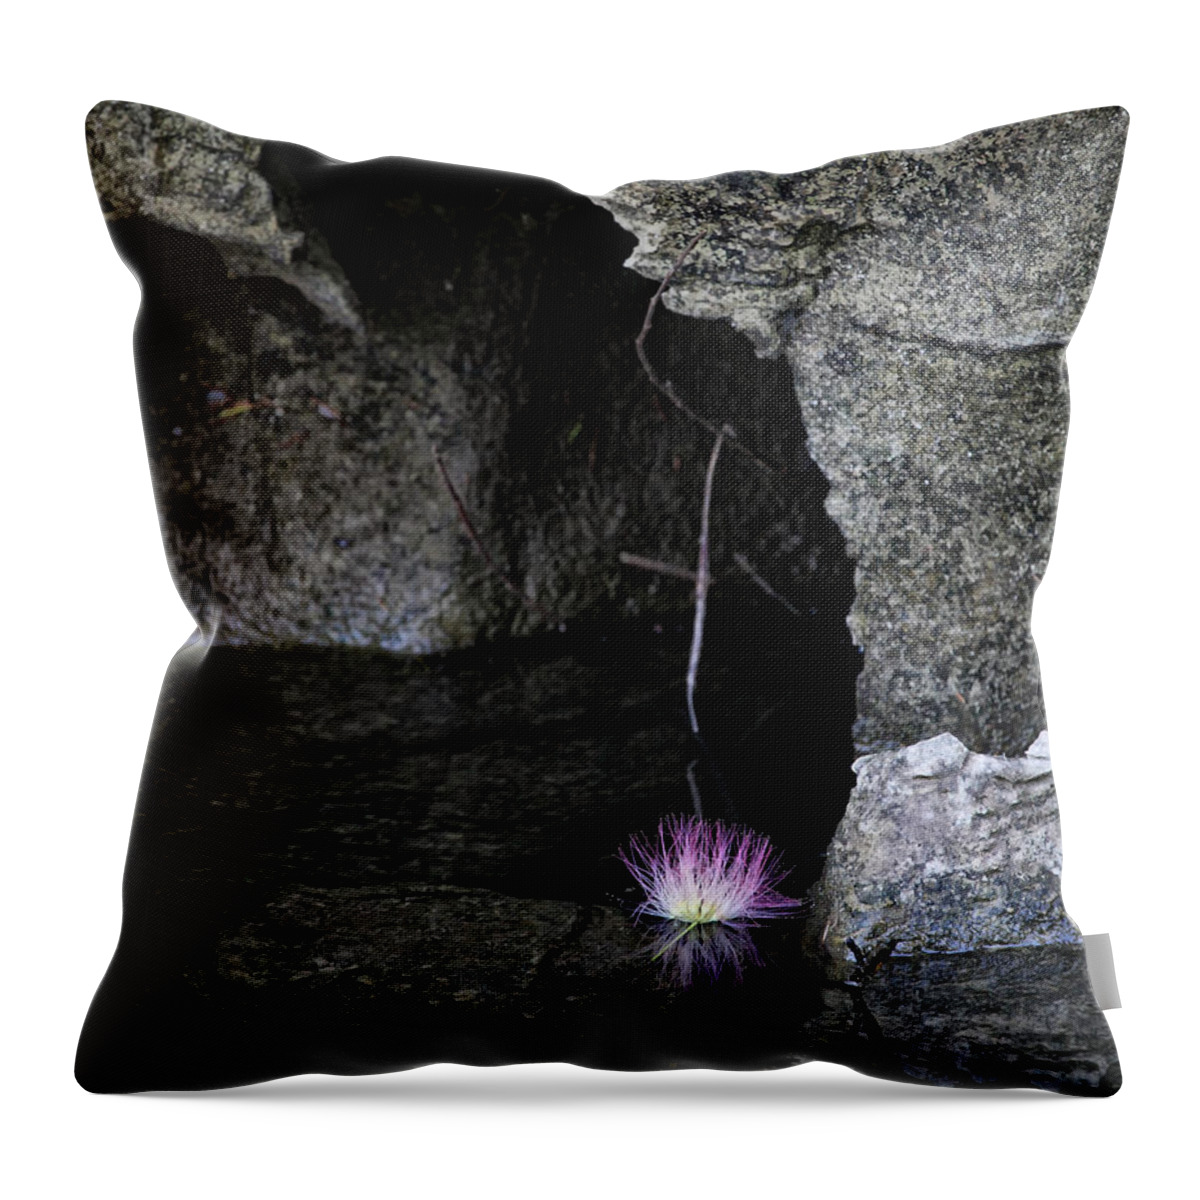 Minimalism Throw Pillow featuring the photograph Dead Flower Floating by Michael Dougherty